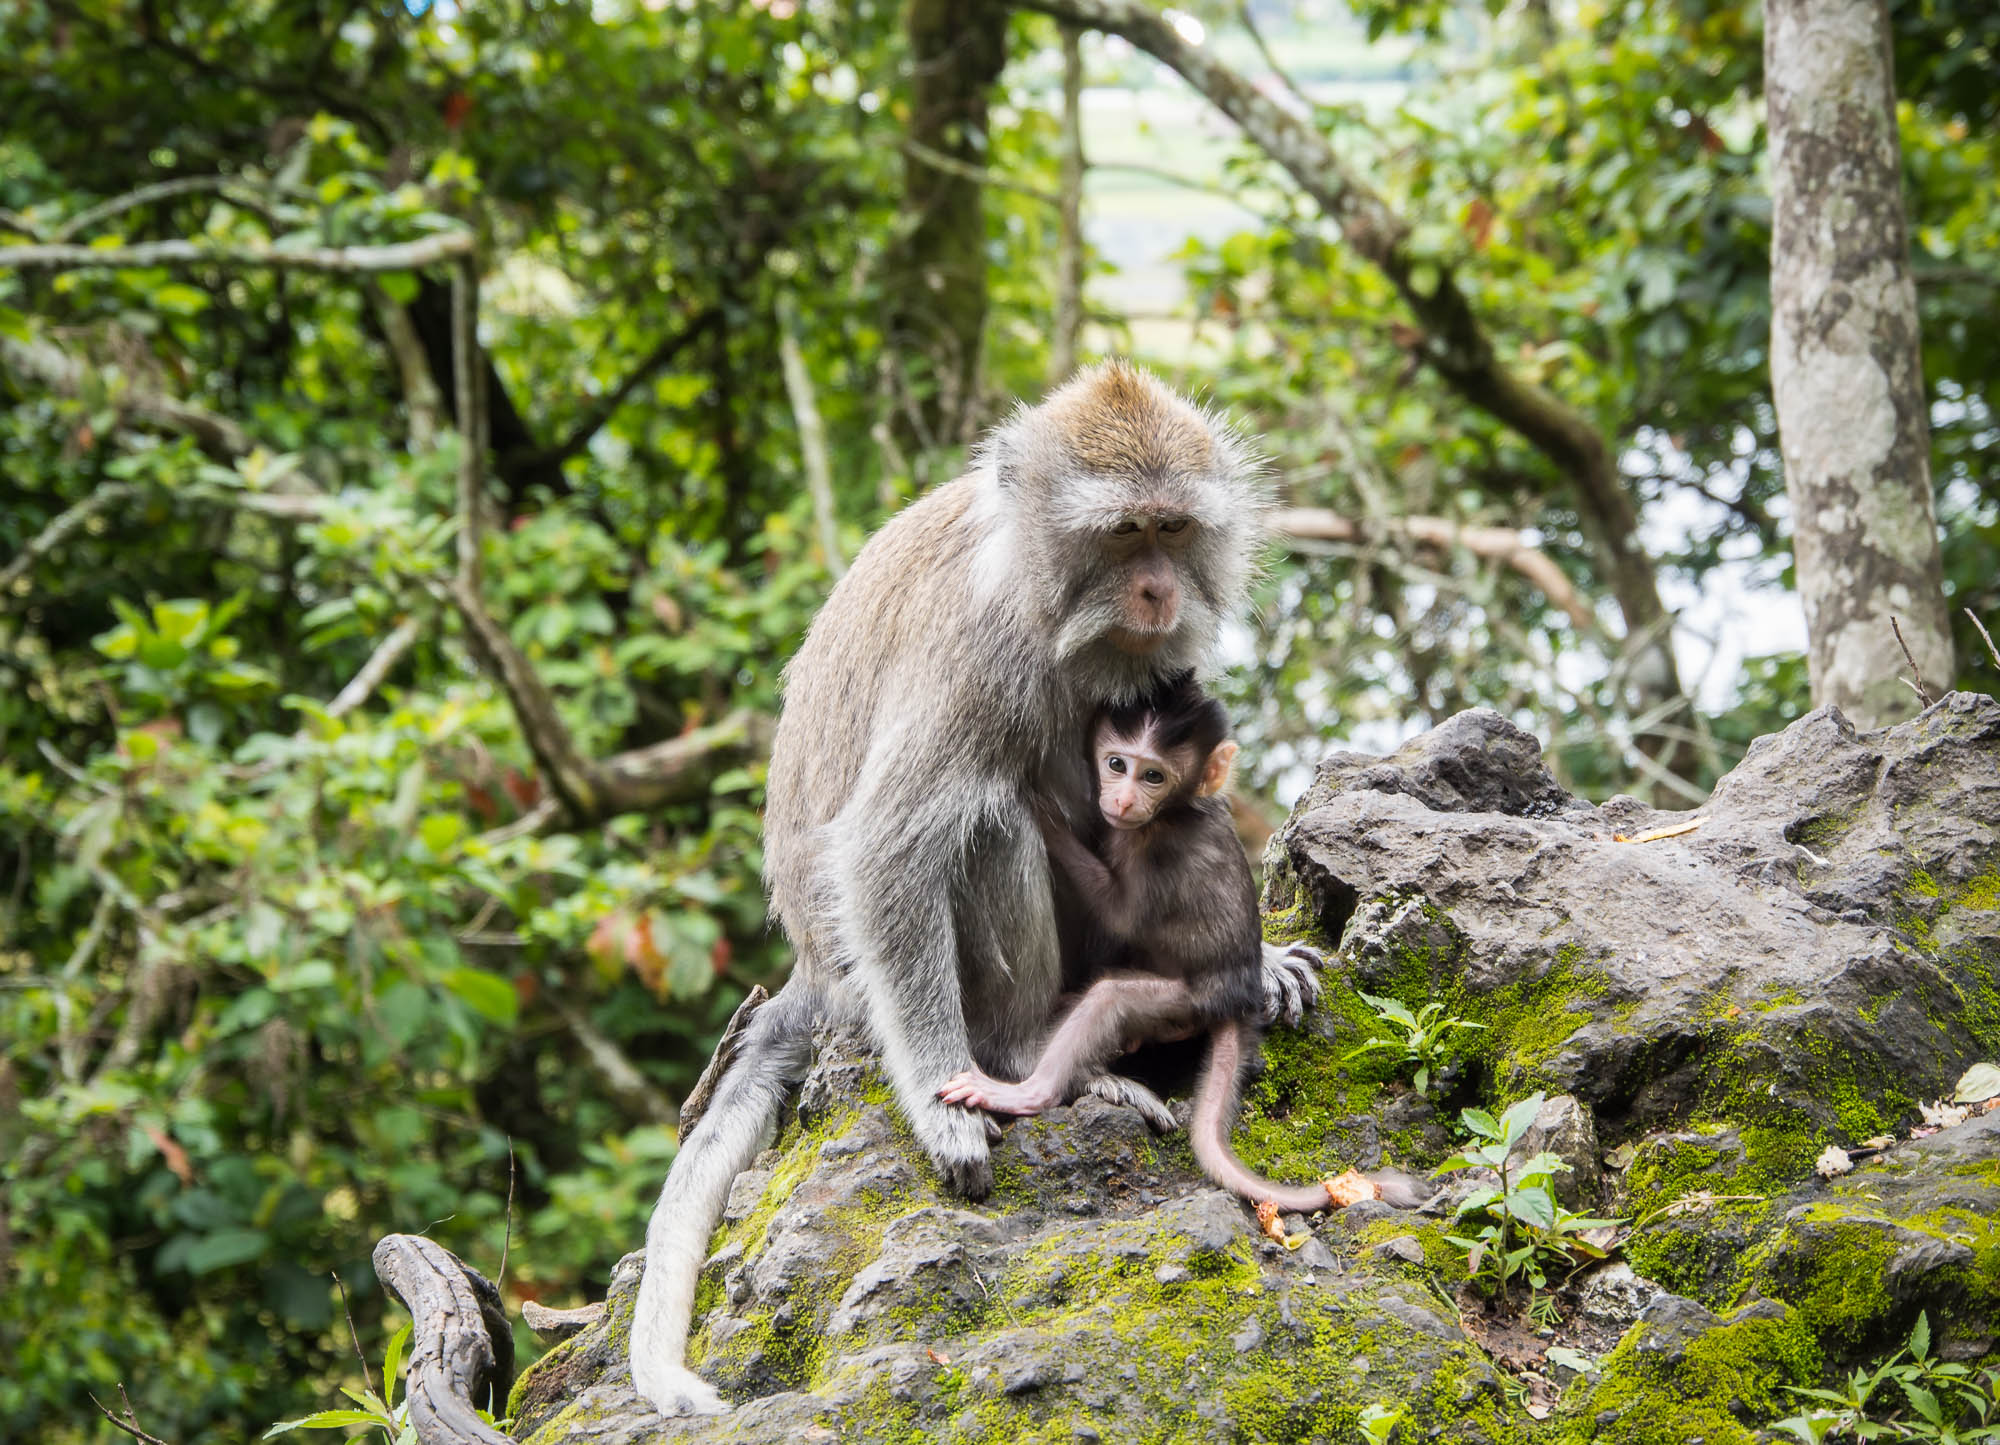 an adult and baby monkey are sitting on a rock in the forest